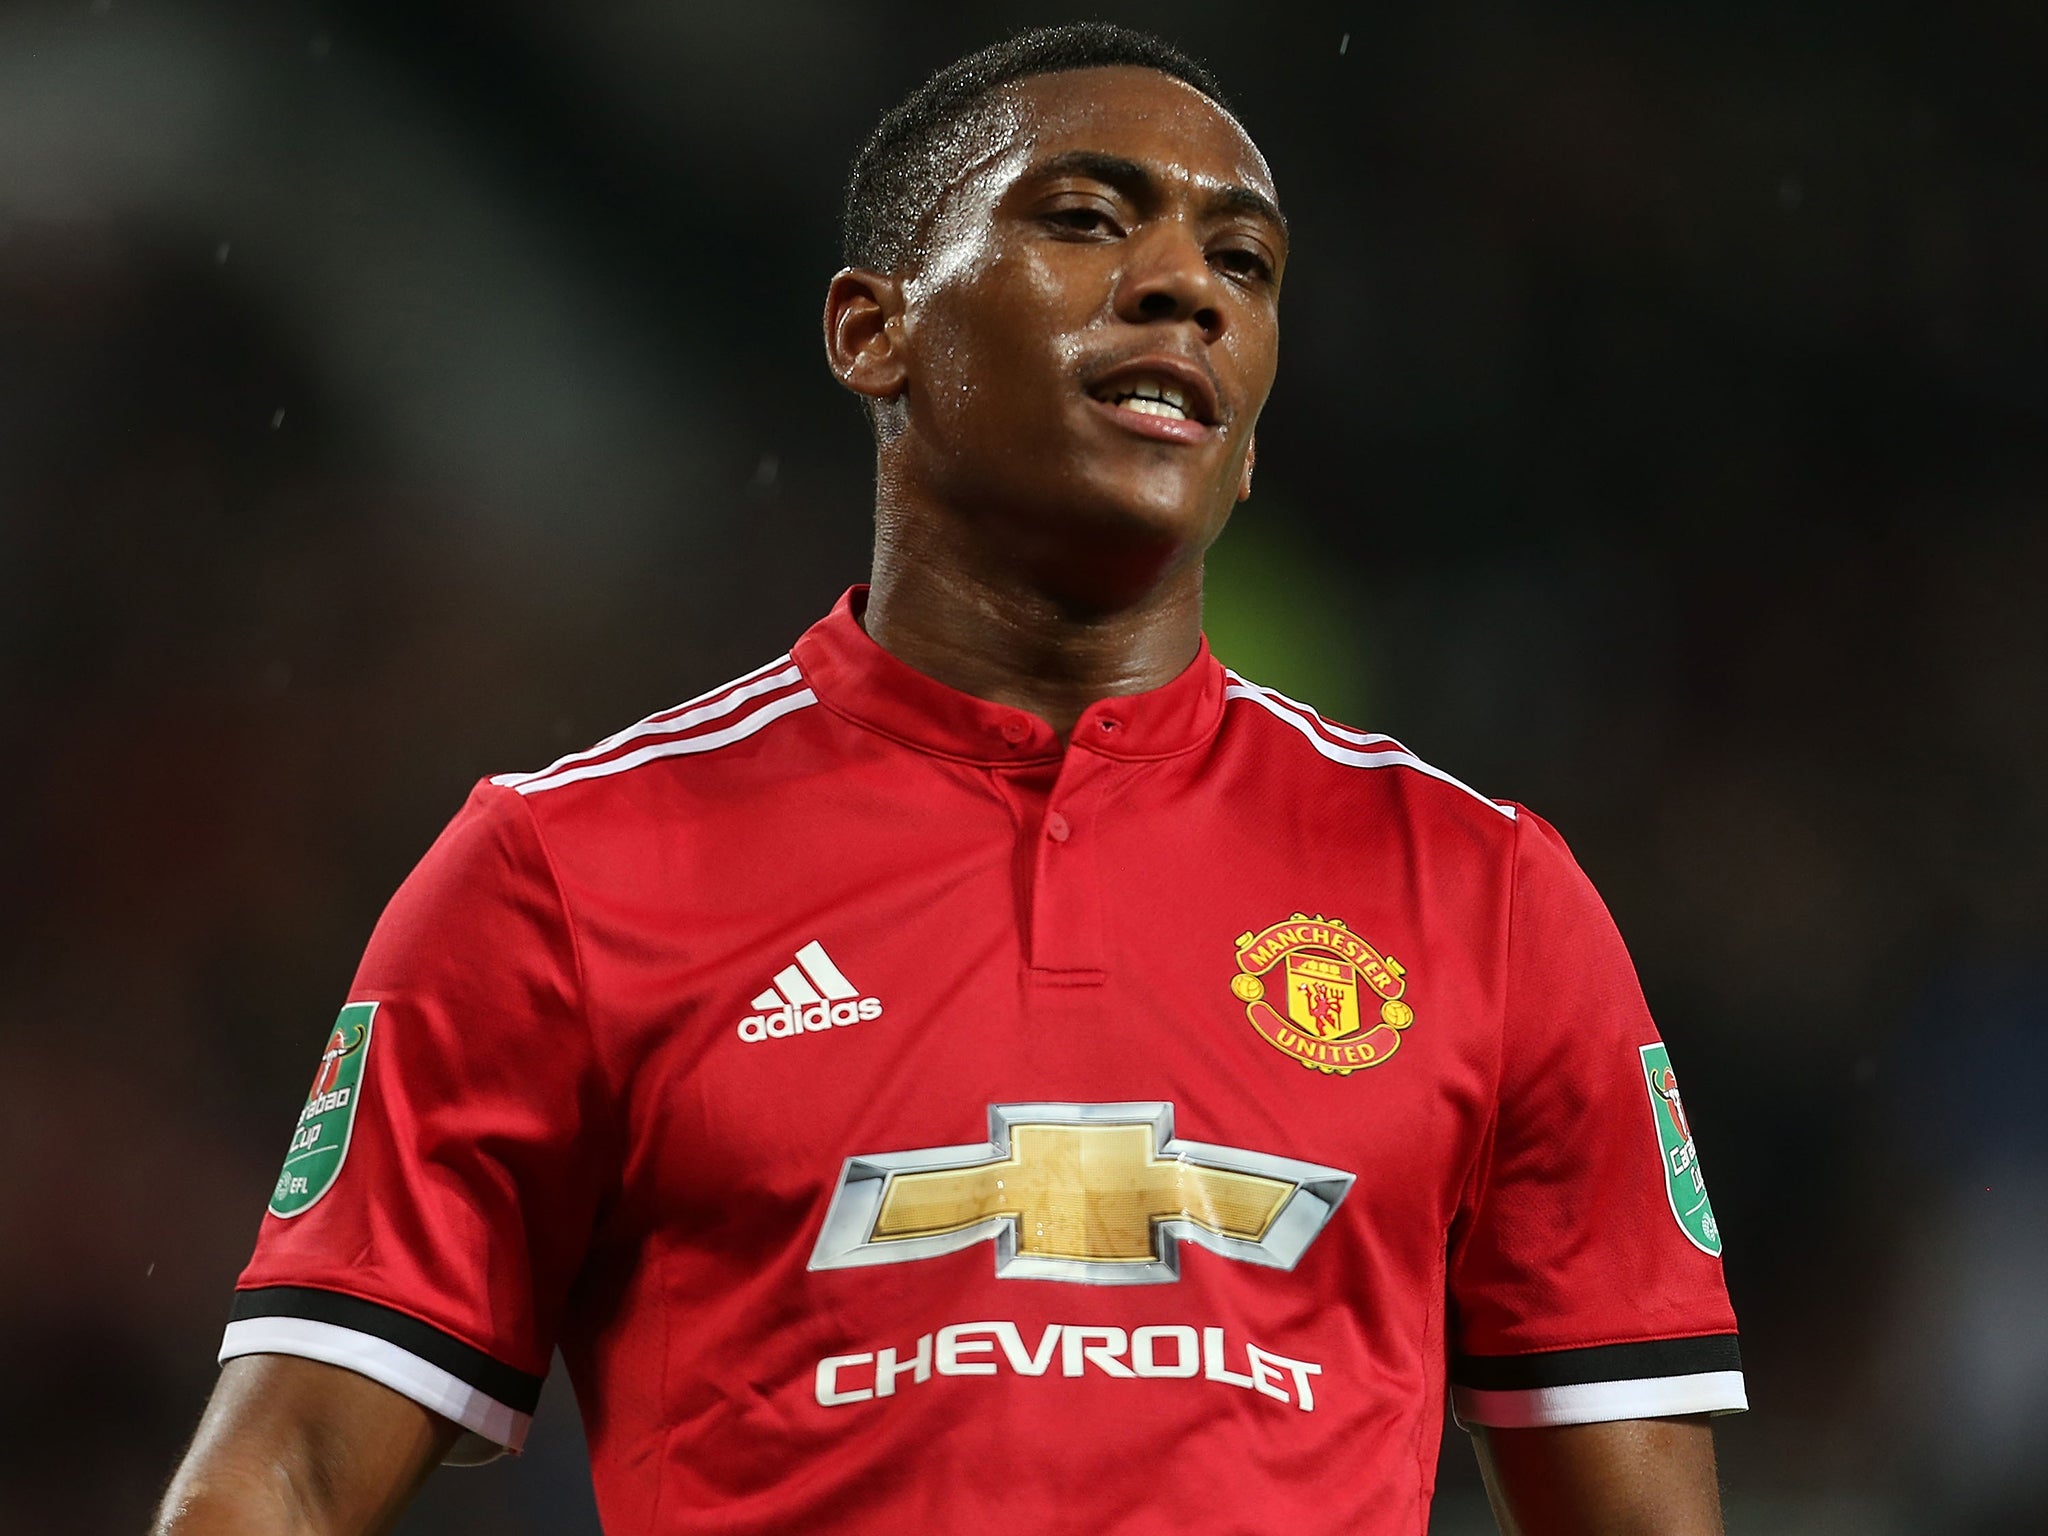 Anthony Martial's form suggests he deserves a chance in the Premier League for Manchester United